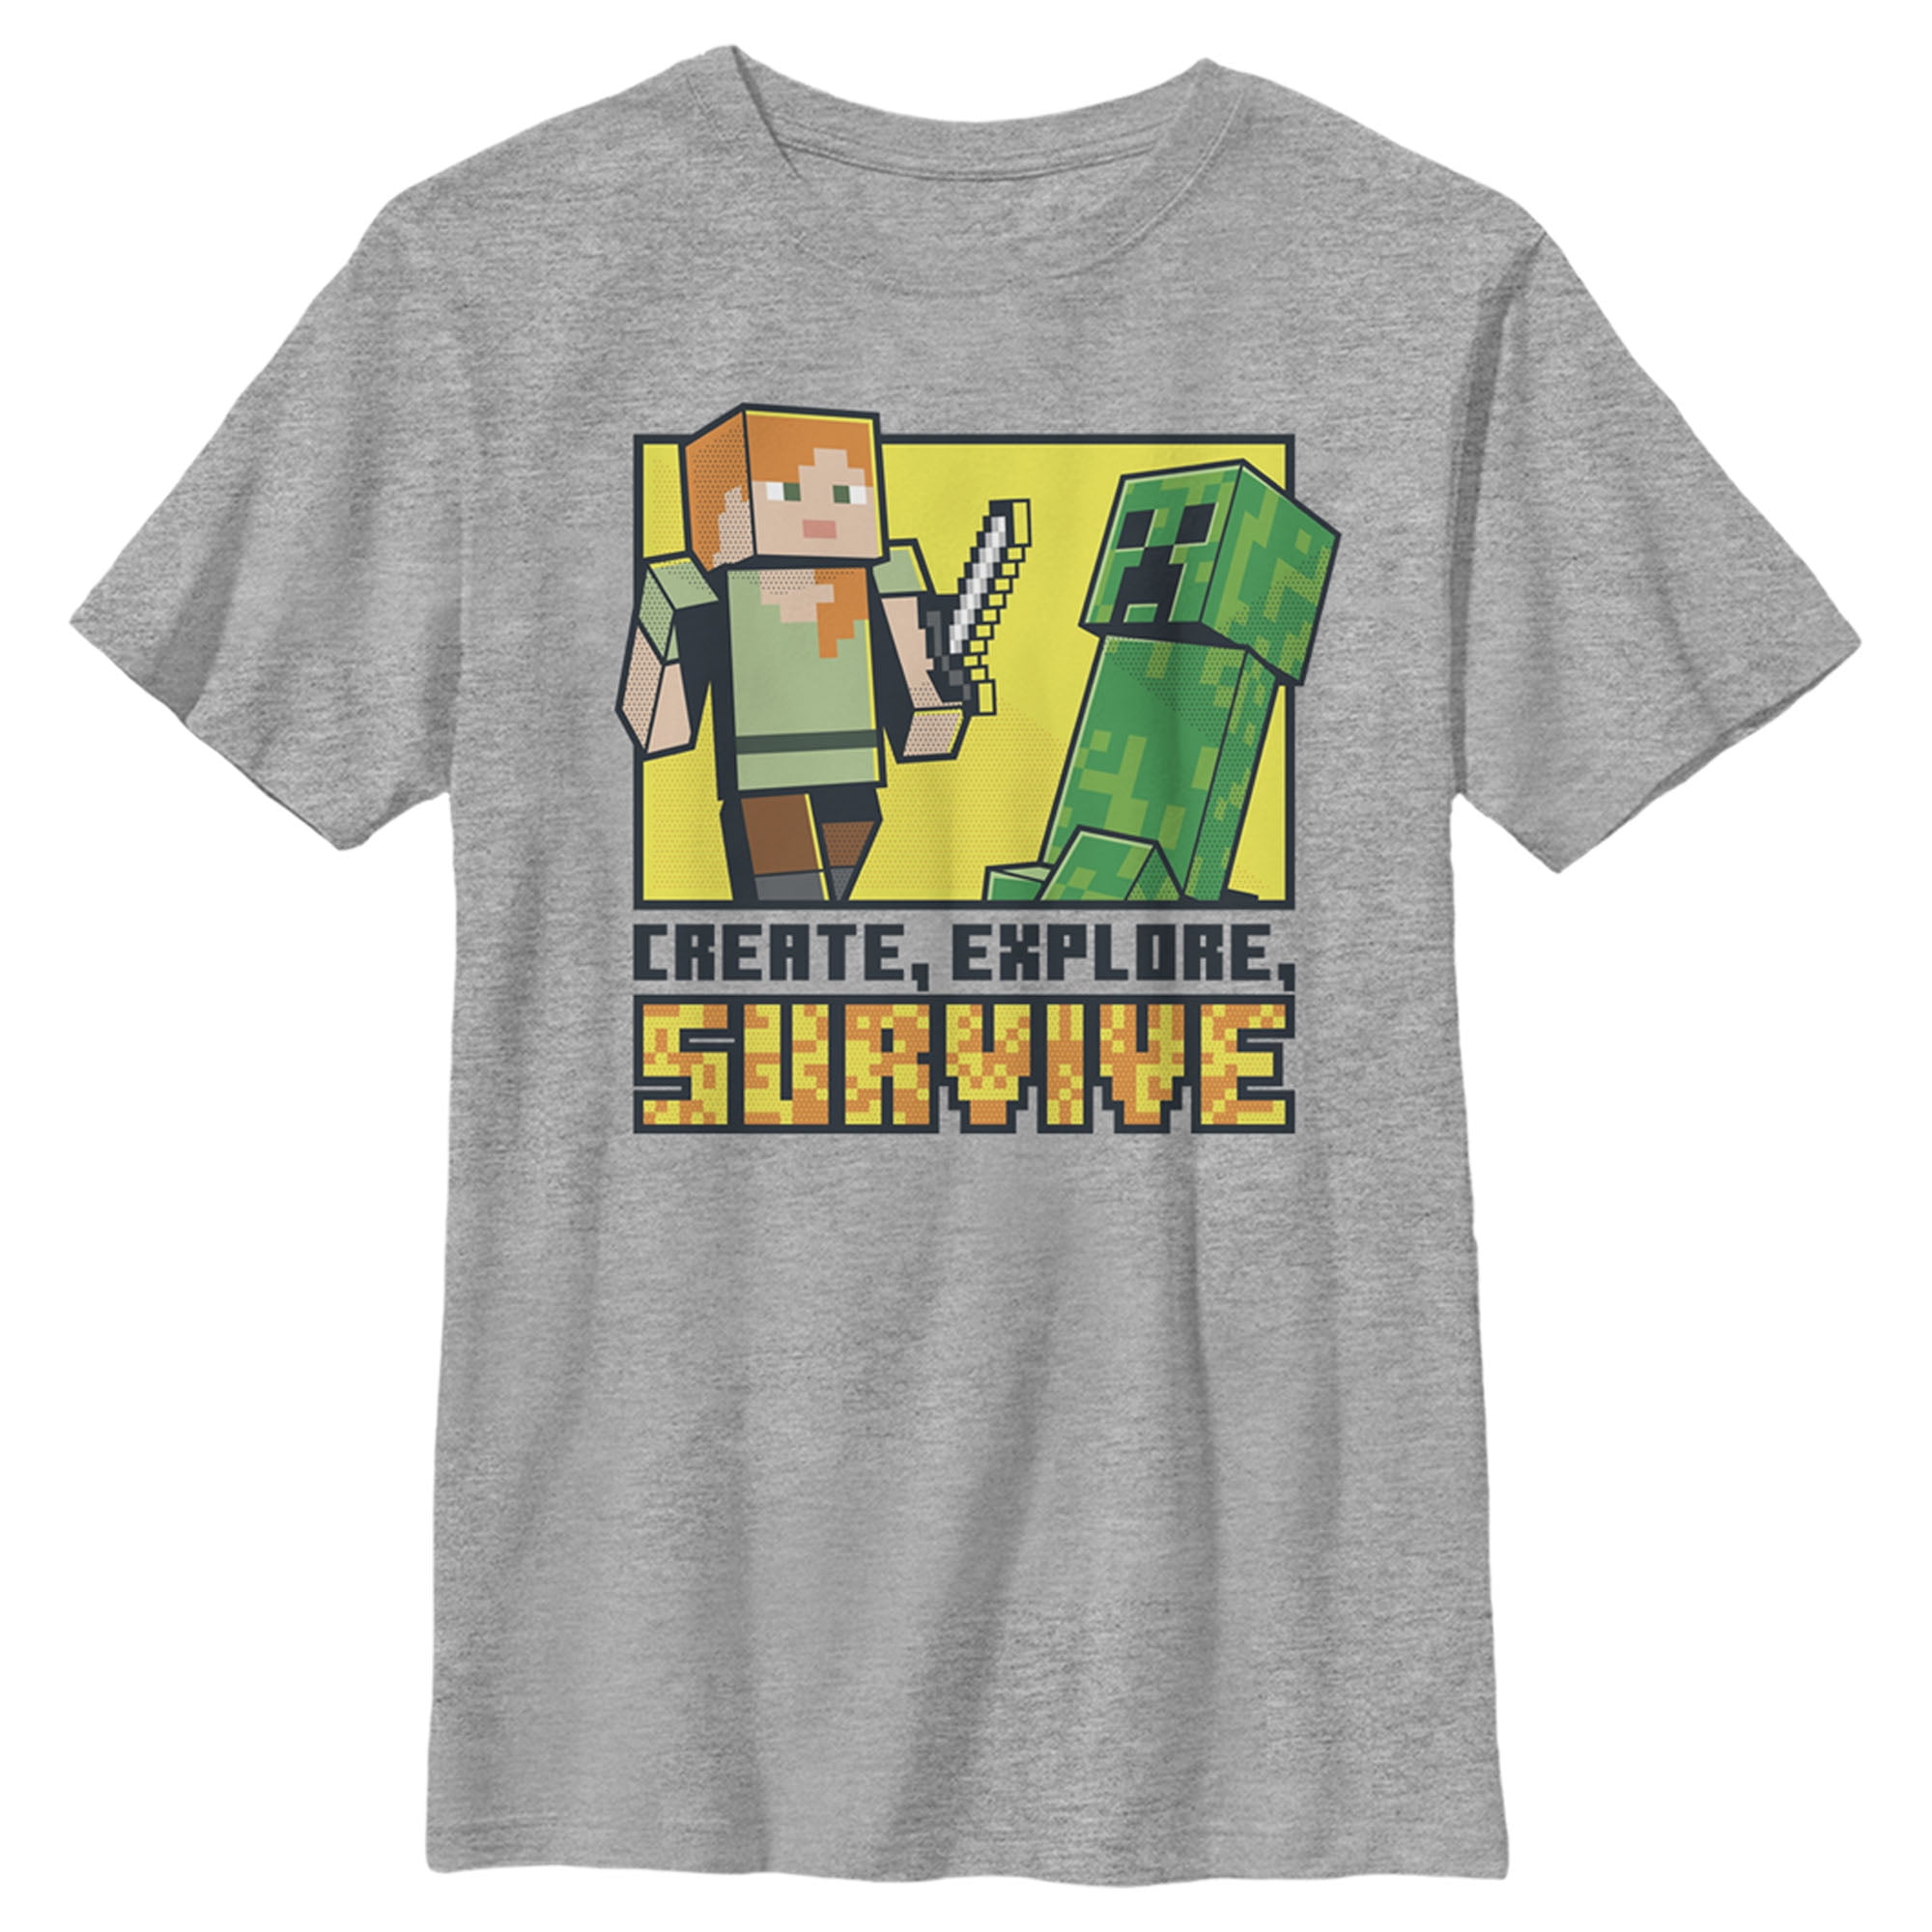 SURVIVAL Adult Minecraft T-Shirt Premium Tee ADULT Gaming Gamers Shirt X-LARGE 